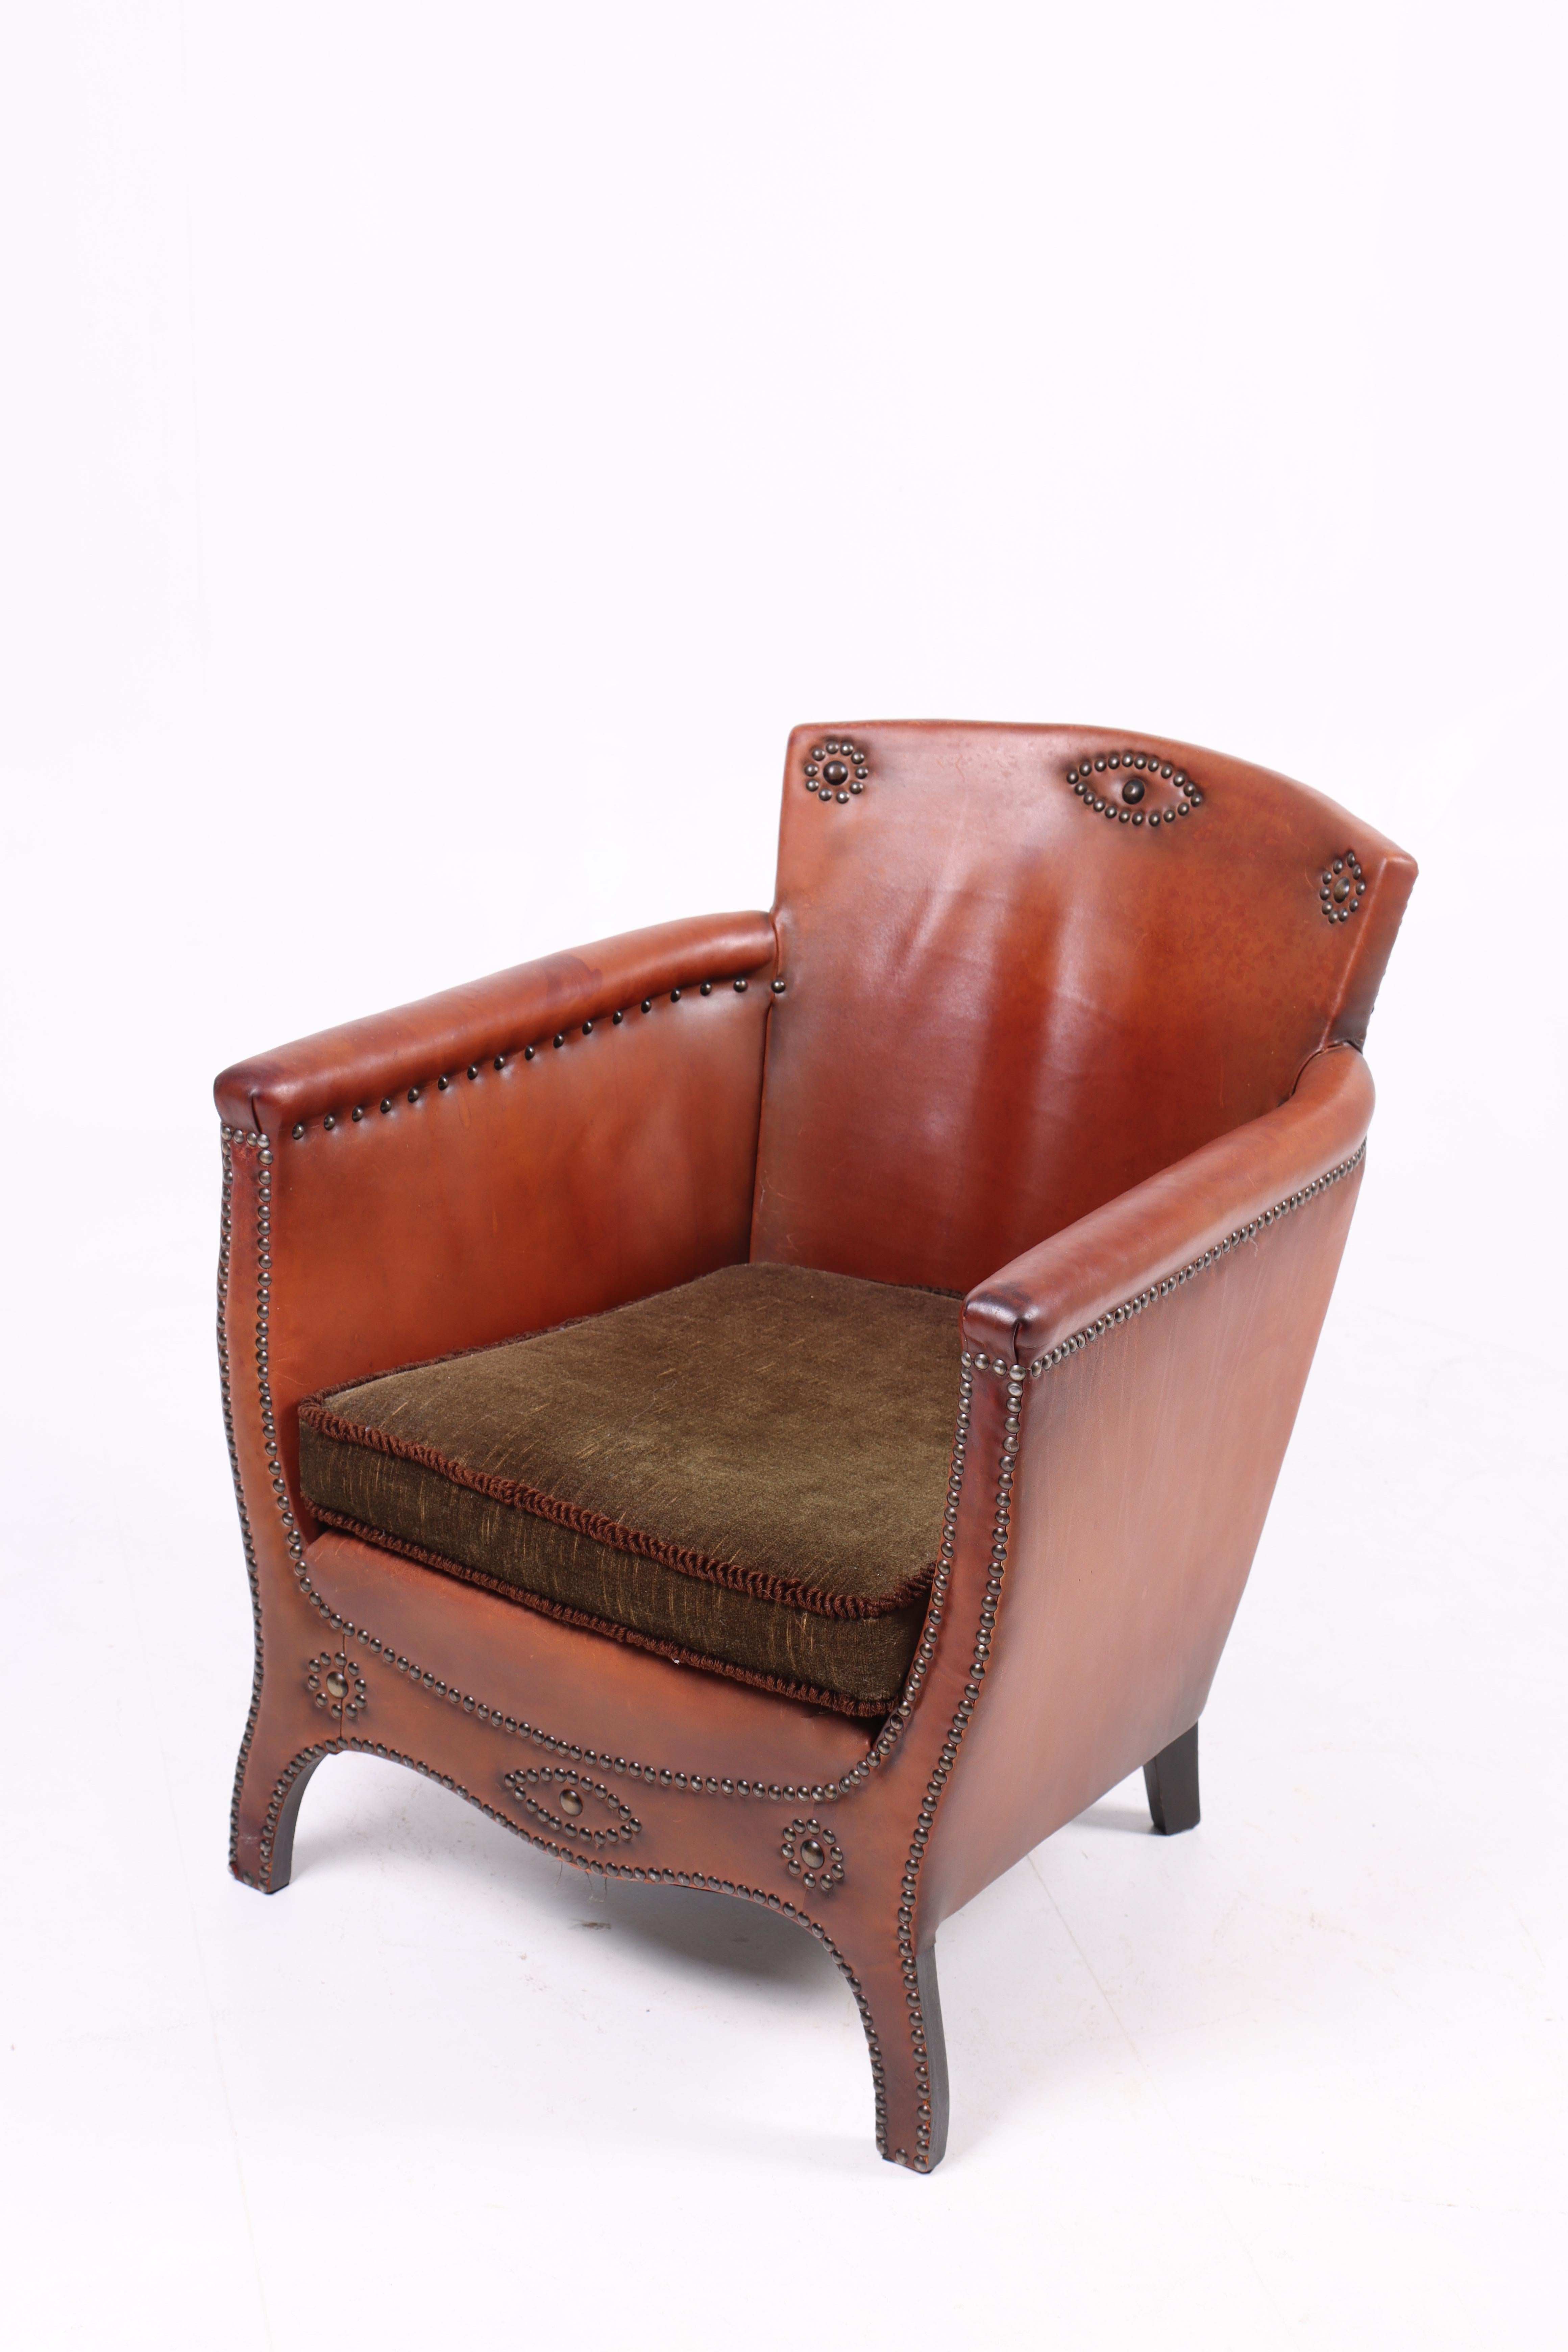 Swedish Lounge Chair in Patinated Leather, Designed by Otto Schulz